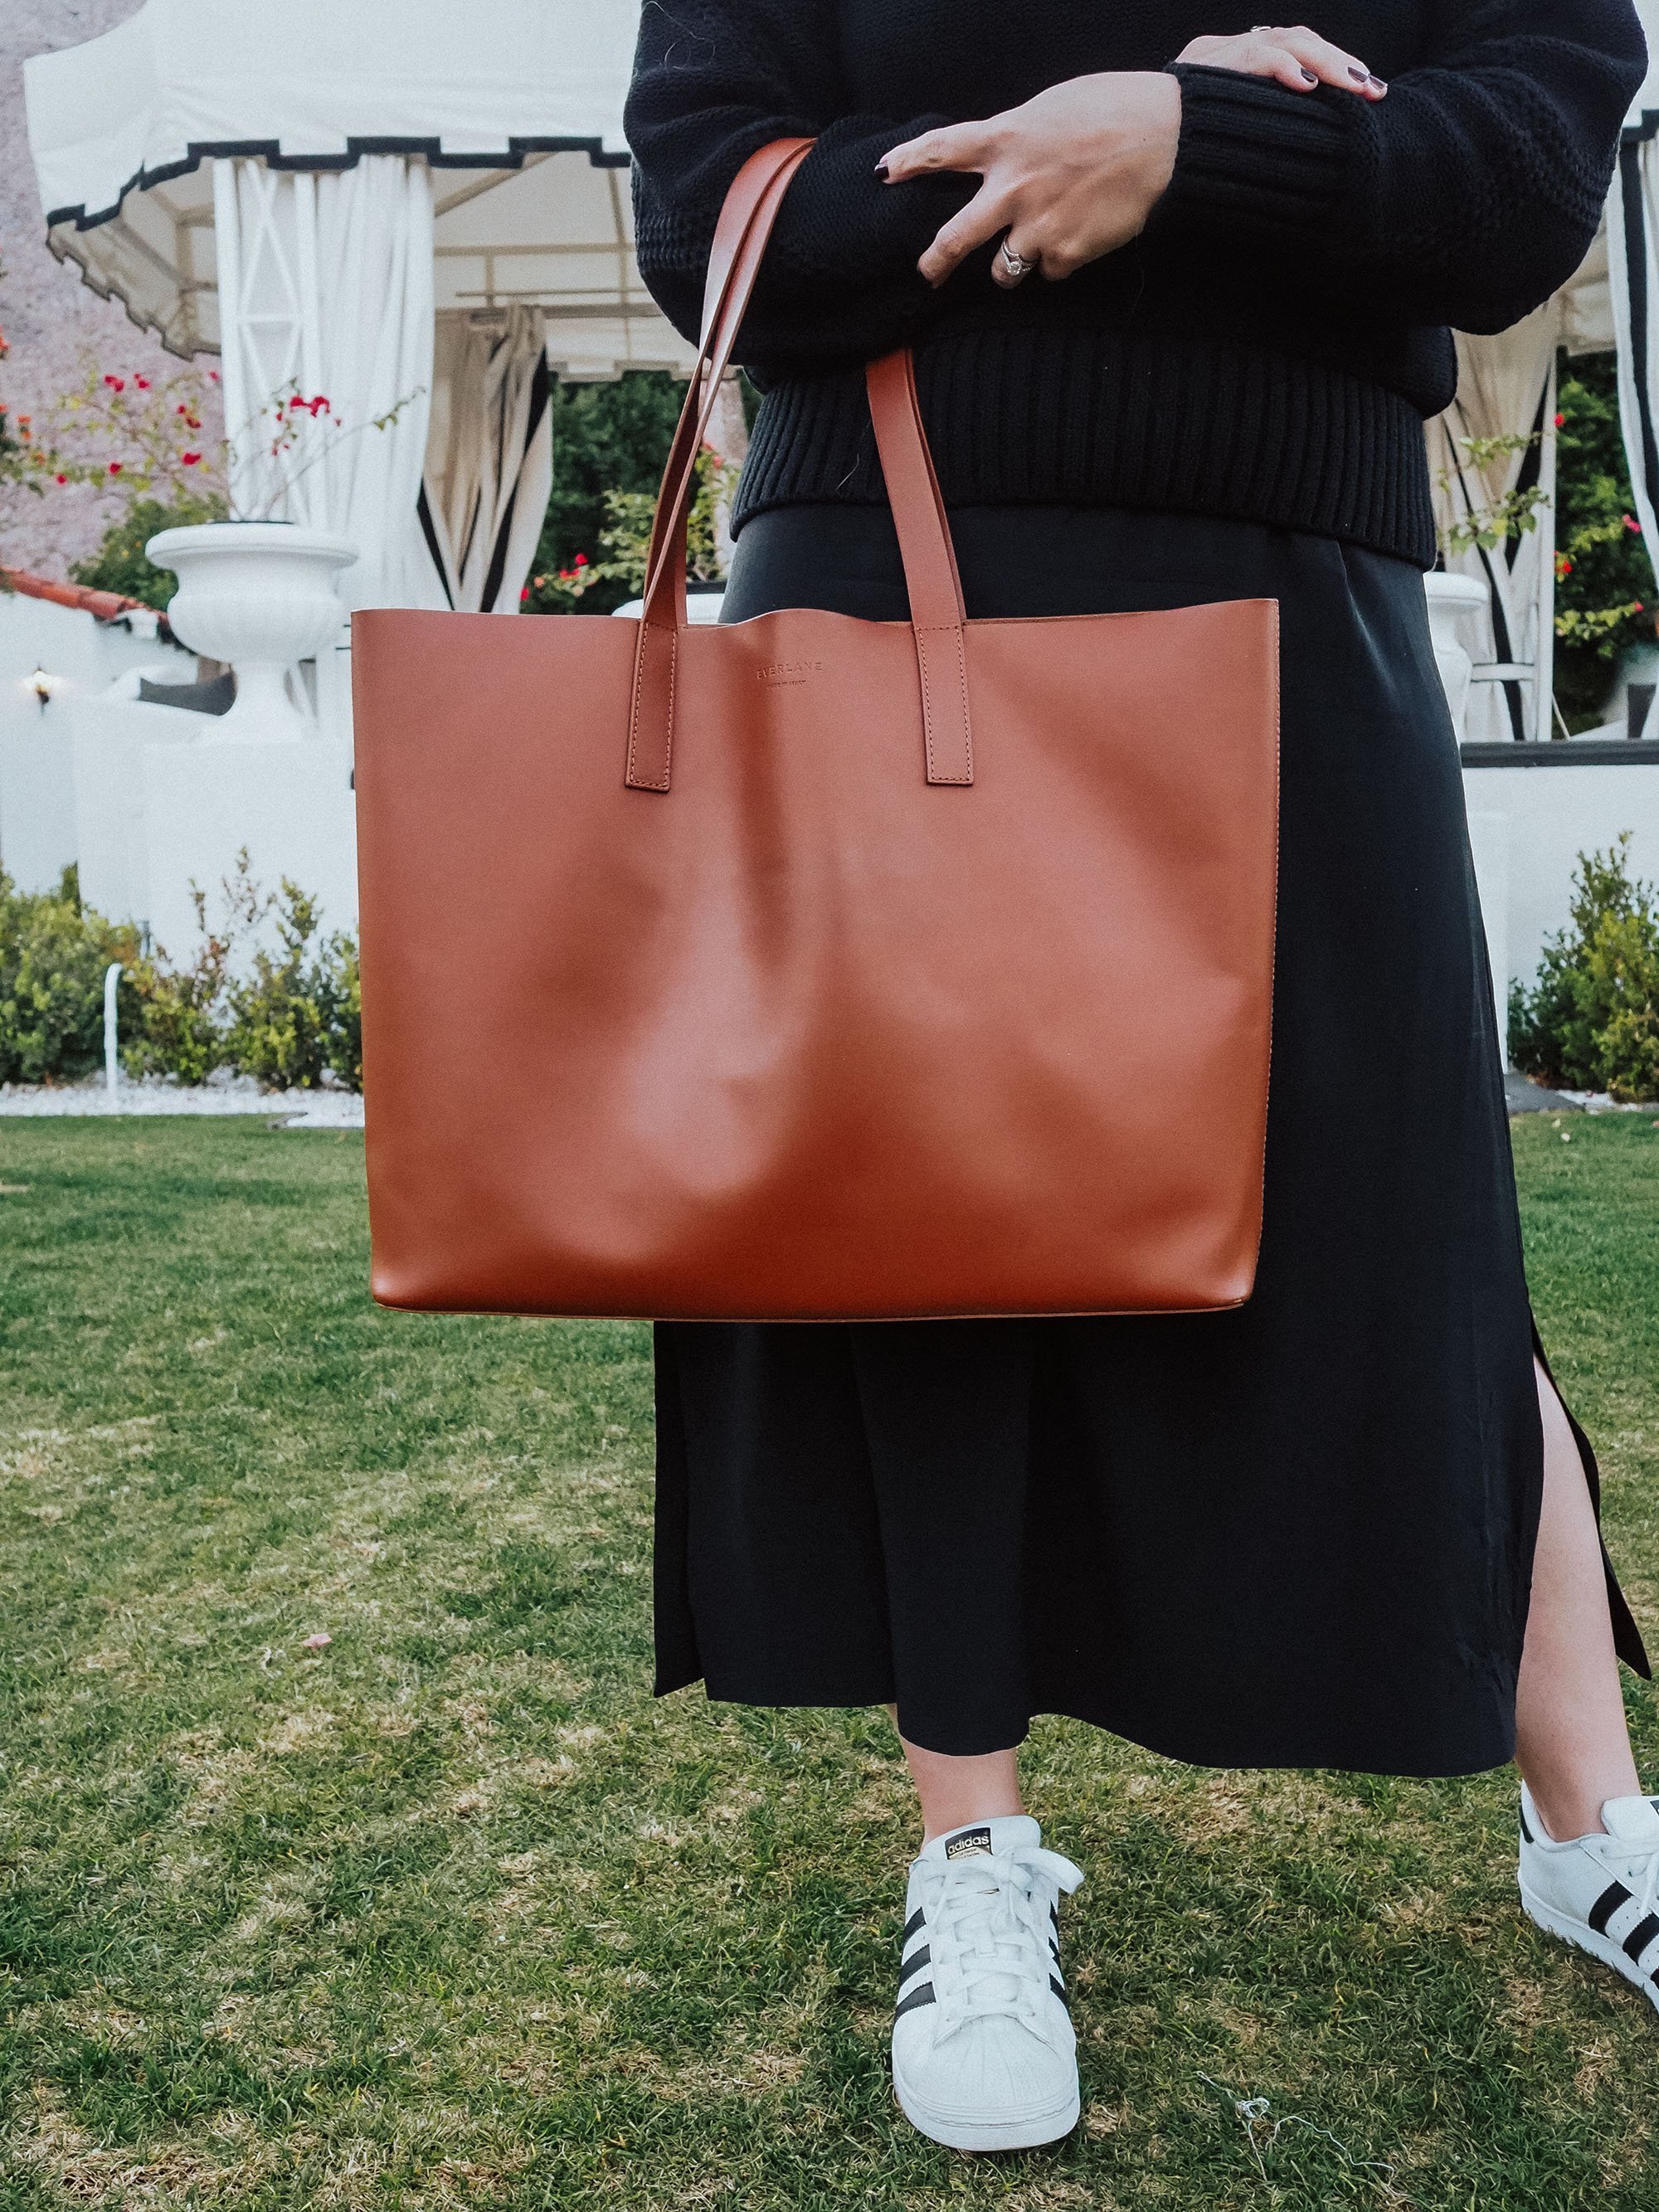 Find out if the Everlane Day Market Tote is worth it in this review